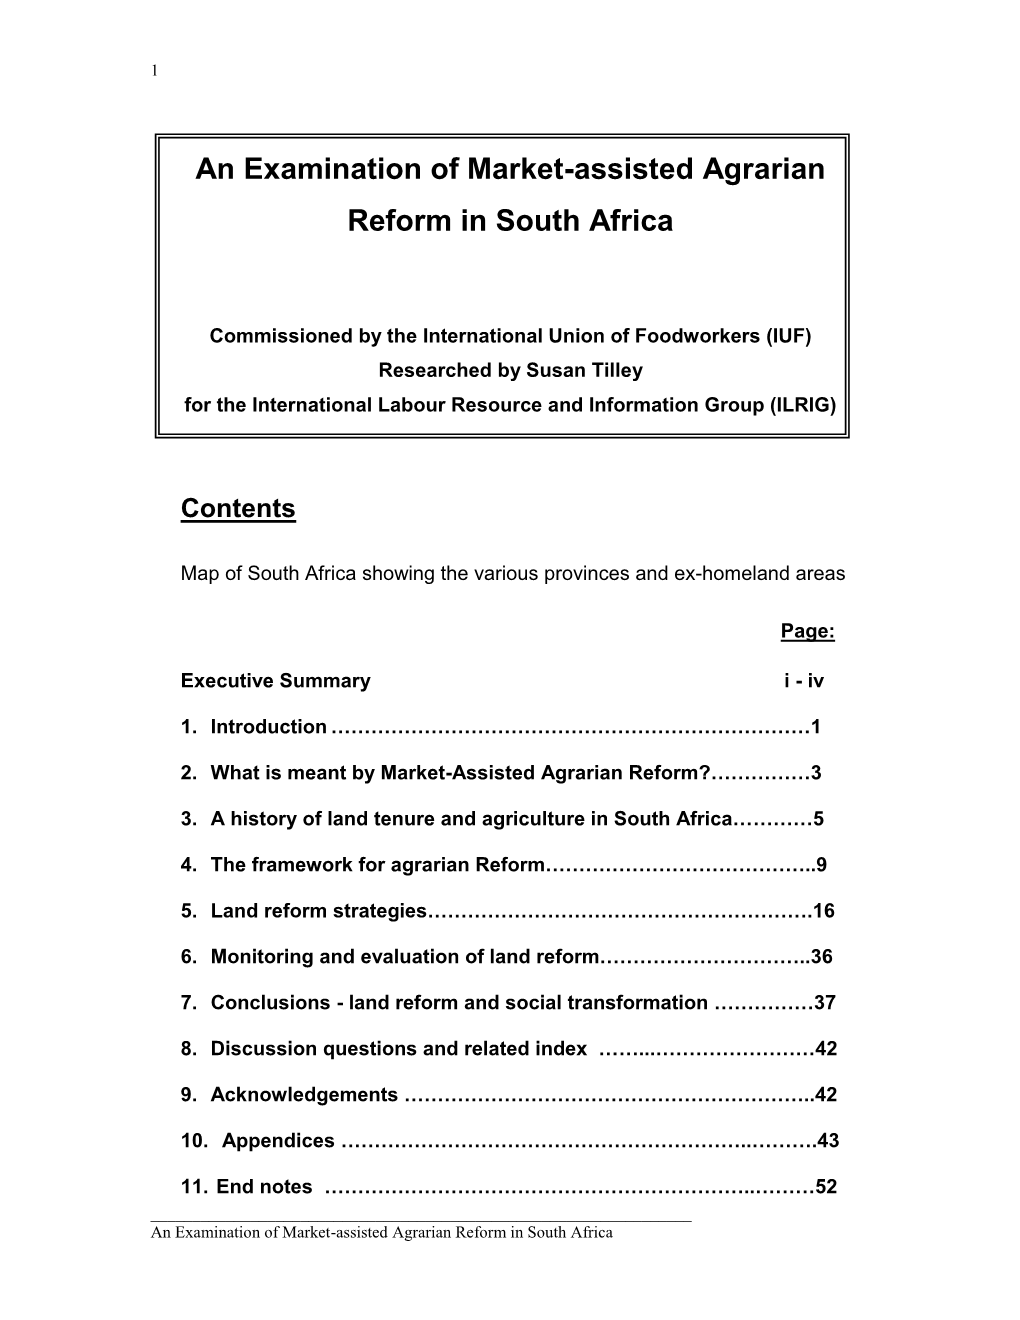 Market-Assisted Agrarian Reform in South Africa